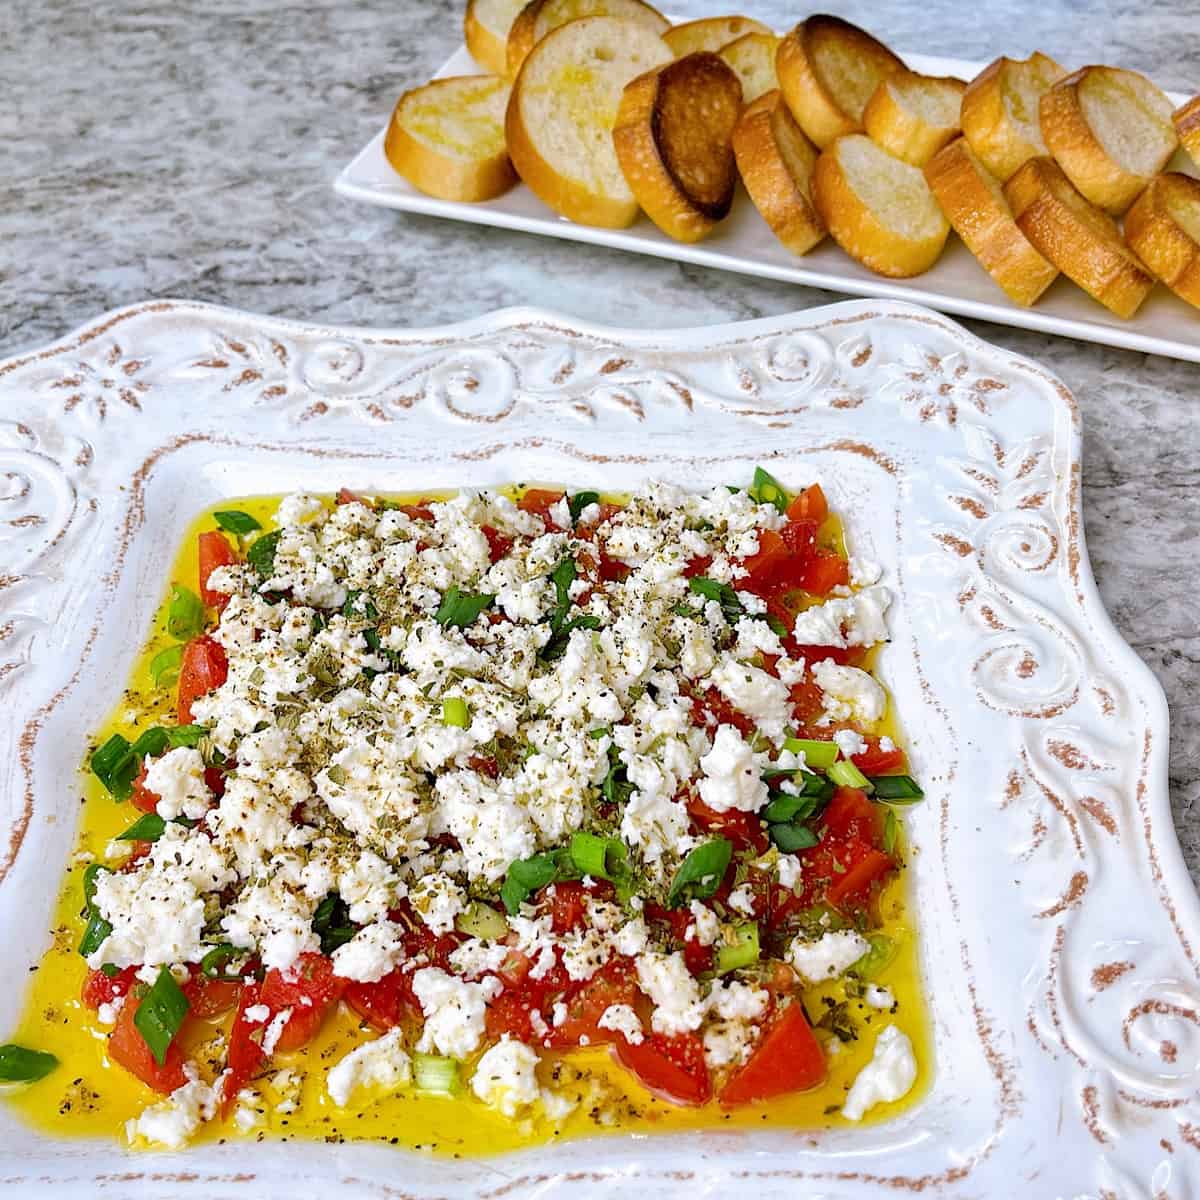 Feta dip on plate with olive oil and oregano